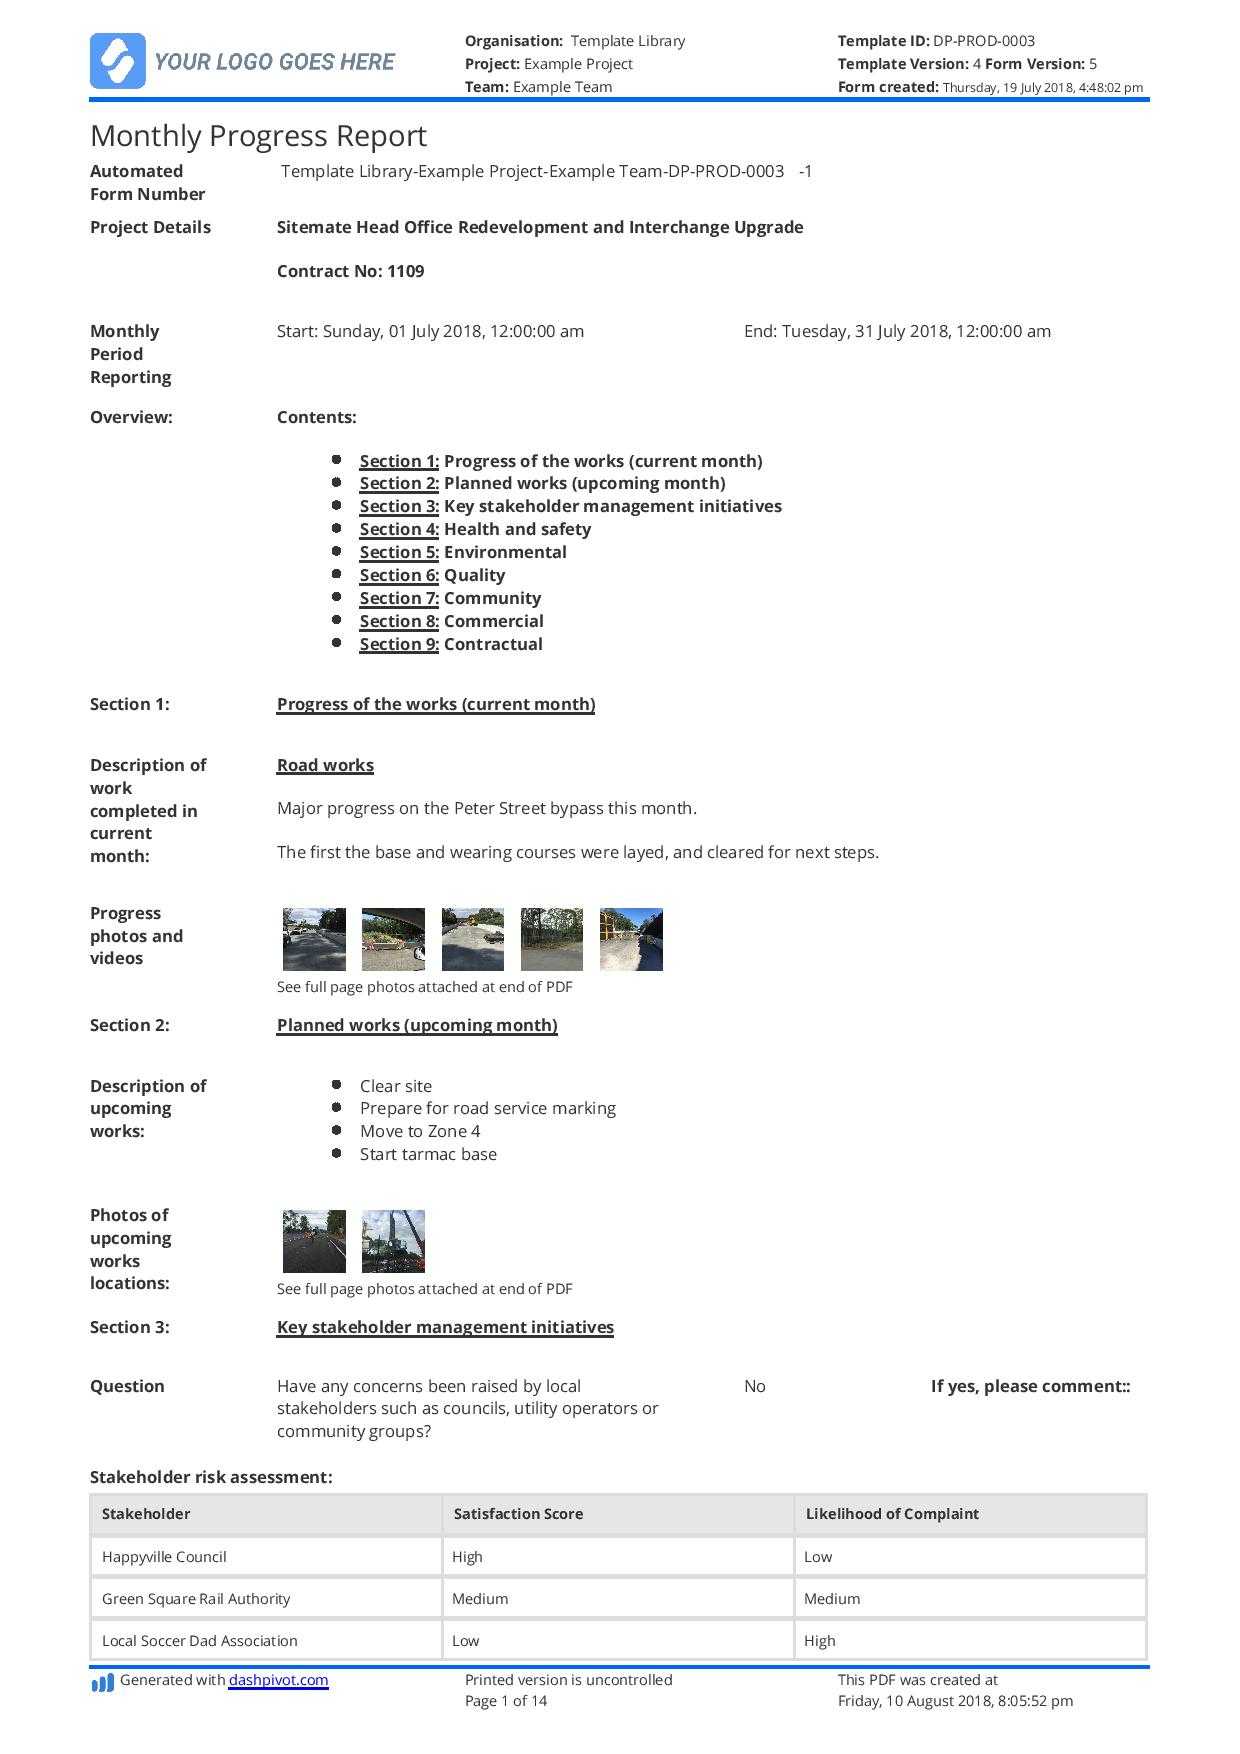 Monthly Construction Progress Report Template: Use This Intended For Site Progress Report Template